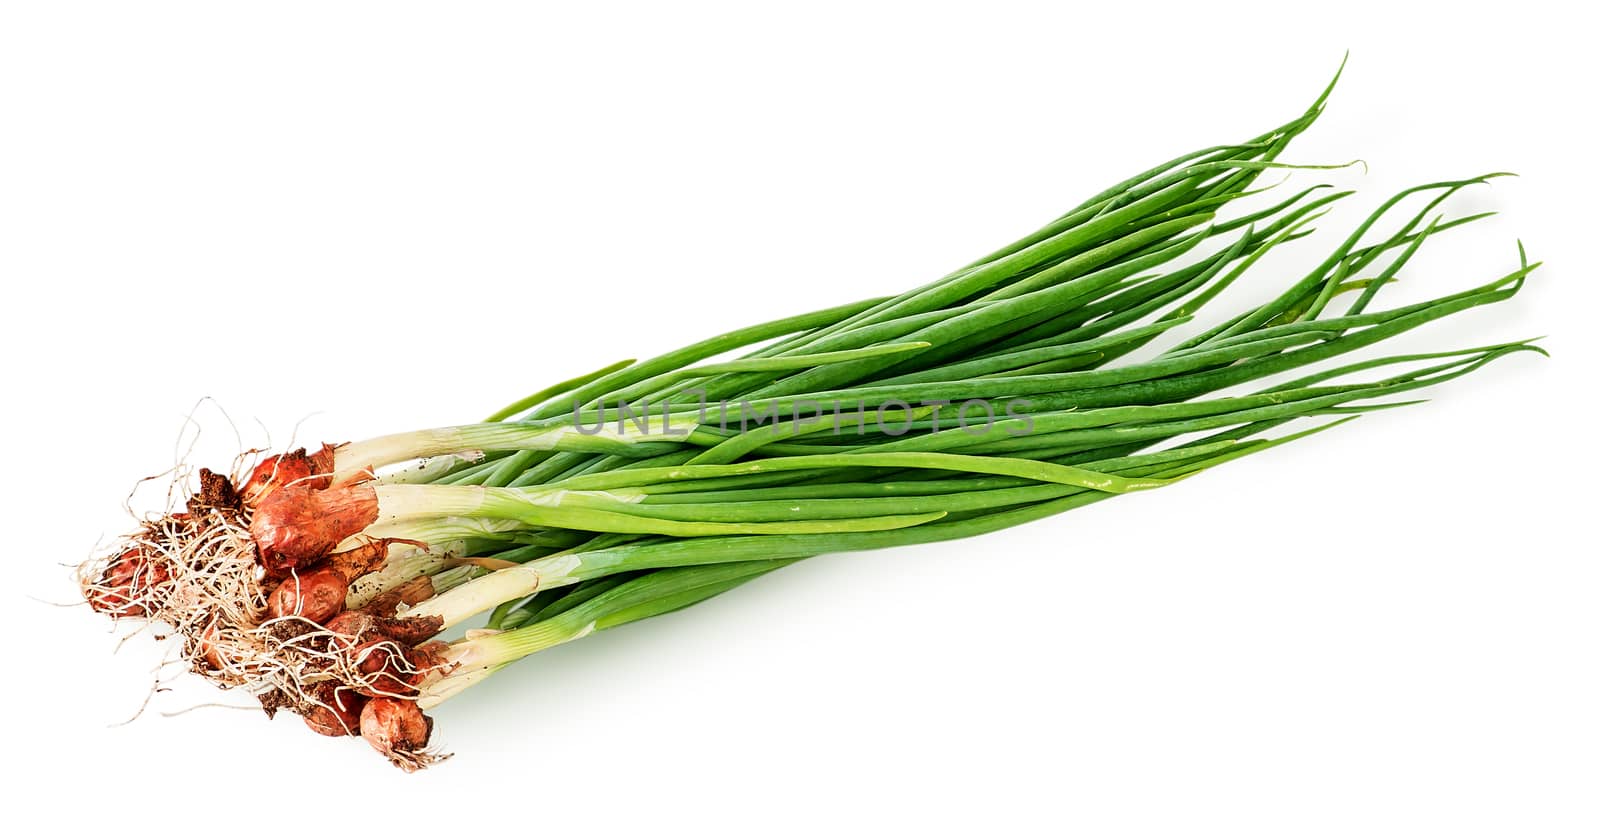 Bunch of young green onions isolated on white background